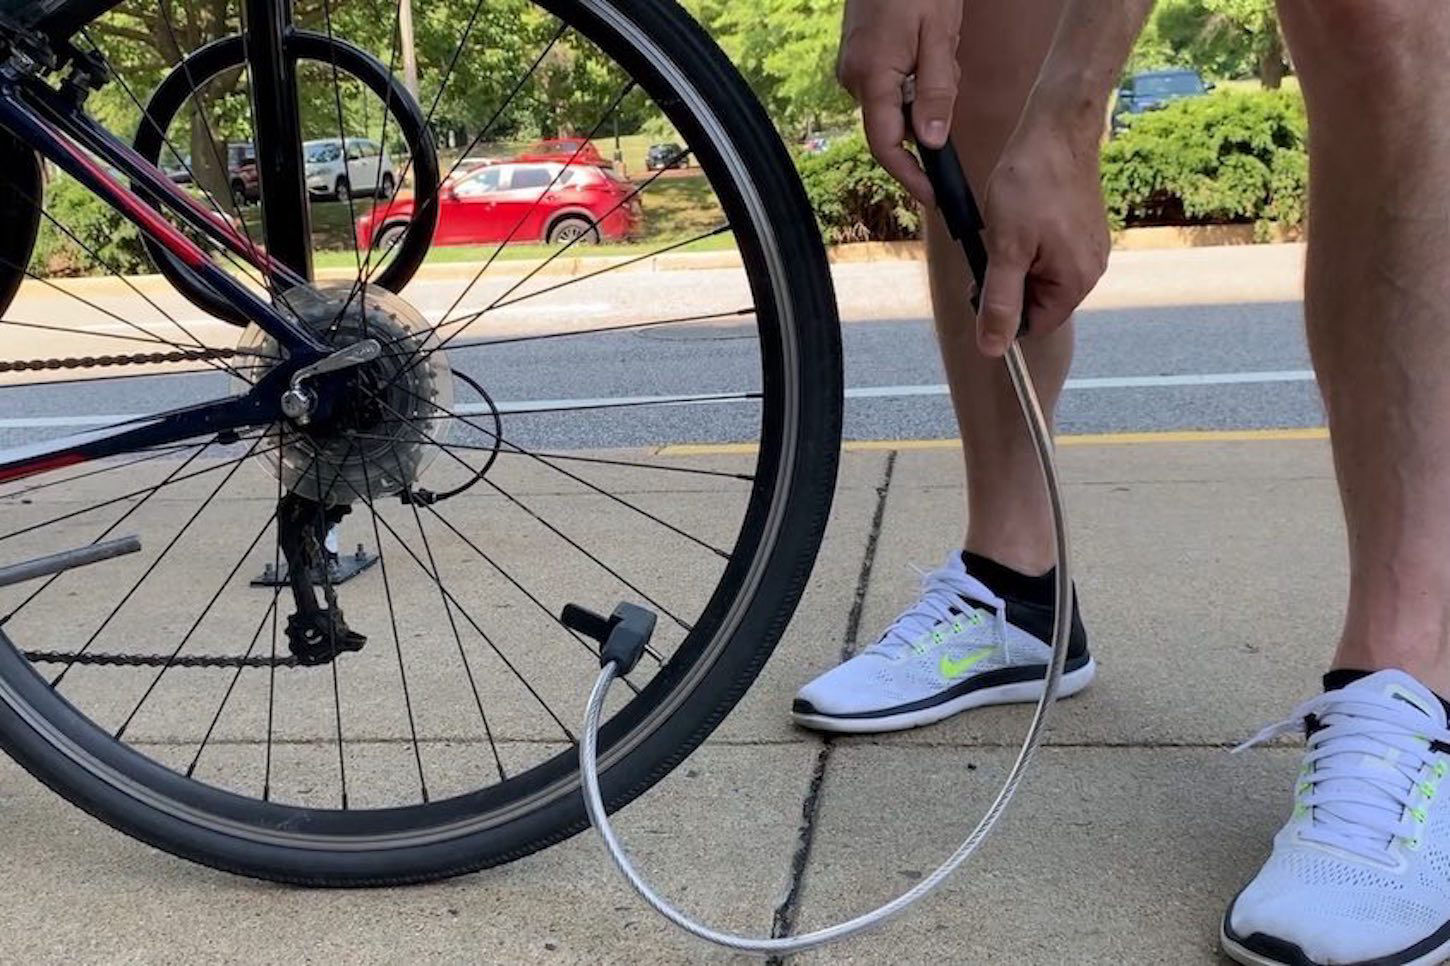 When inflating a tire for the first time, let all the air out of the tire first